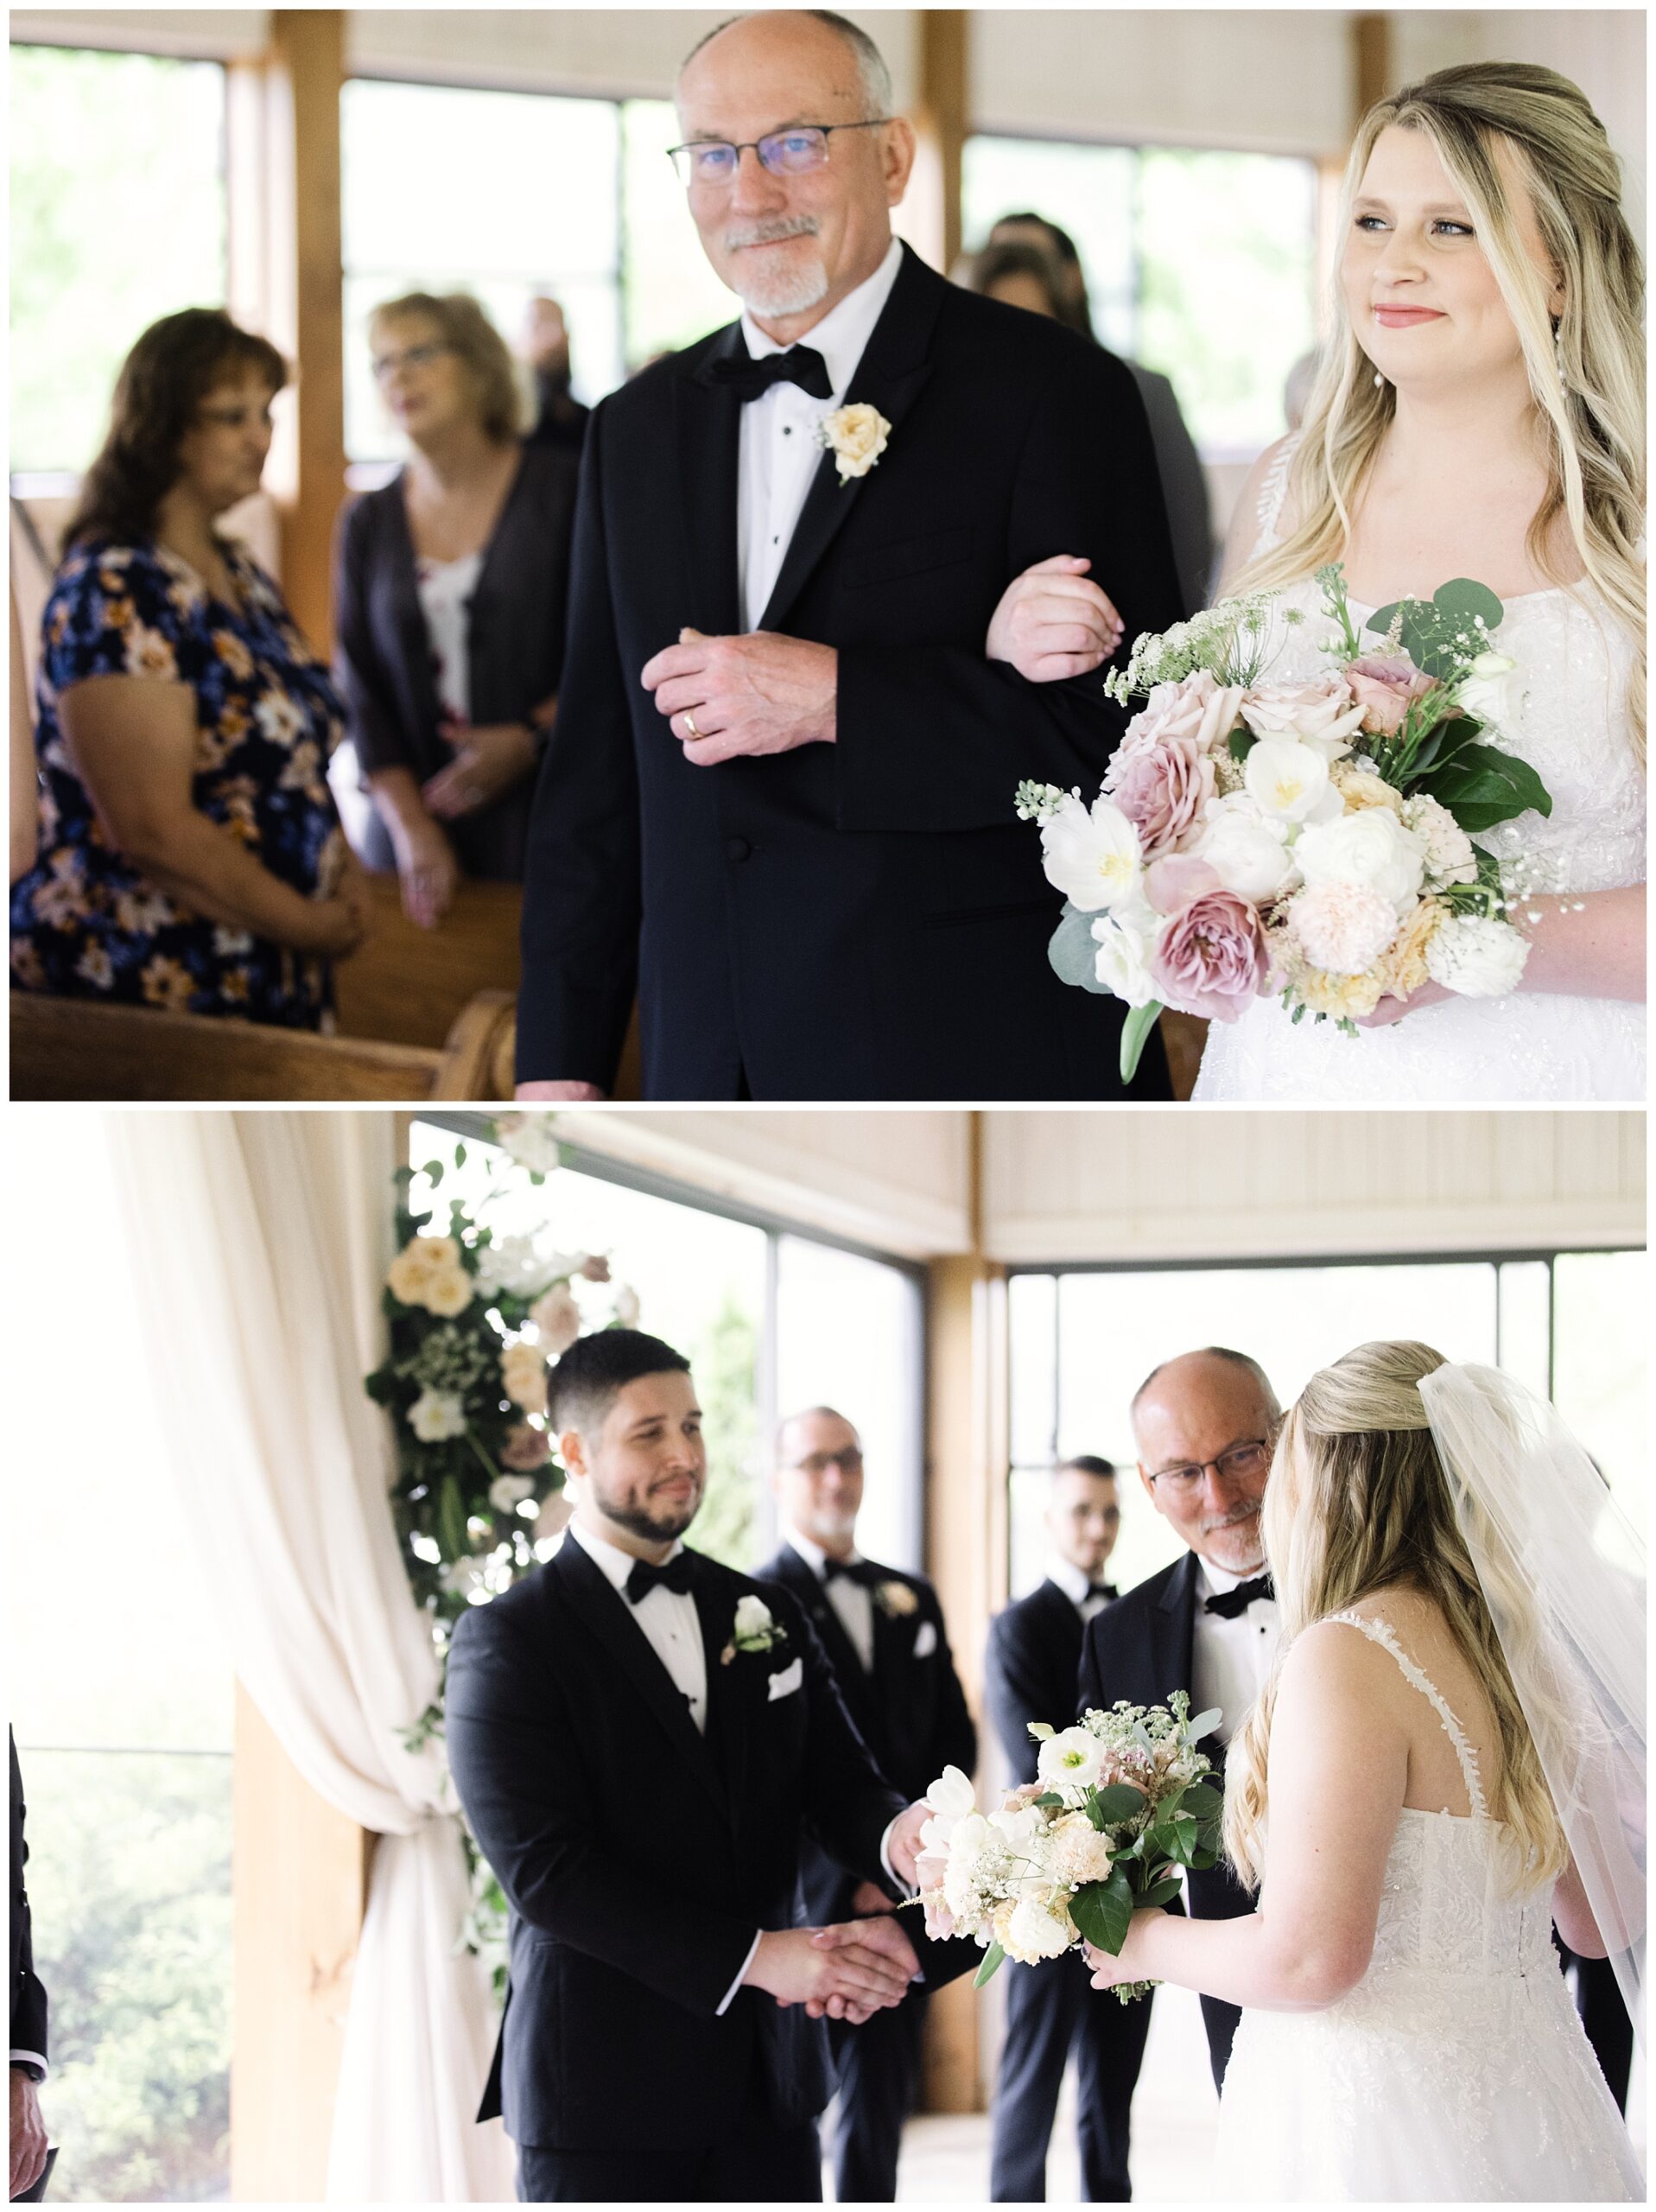 Two photos of a mountain wedding ceremony at Chestnut Ridge: top shows a bride with her father; bottom captures bride and groom holding hands at the altar.